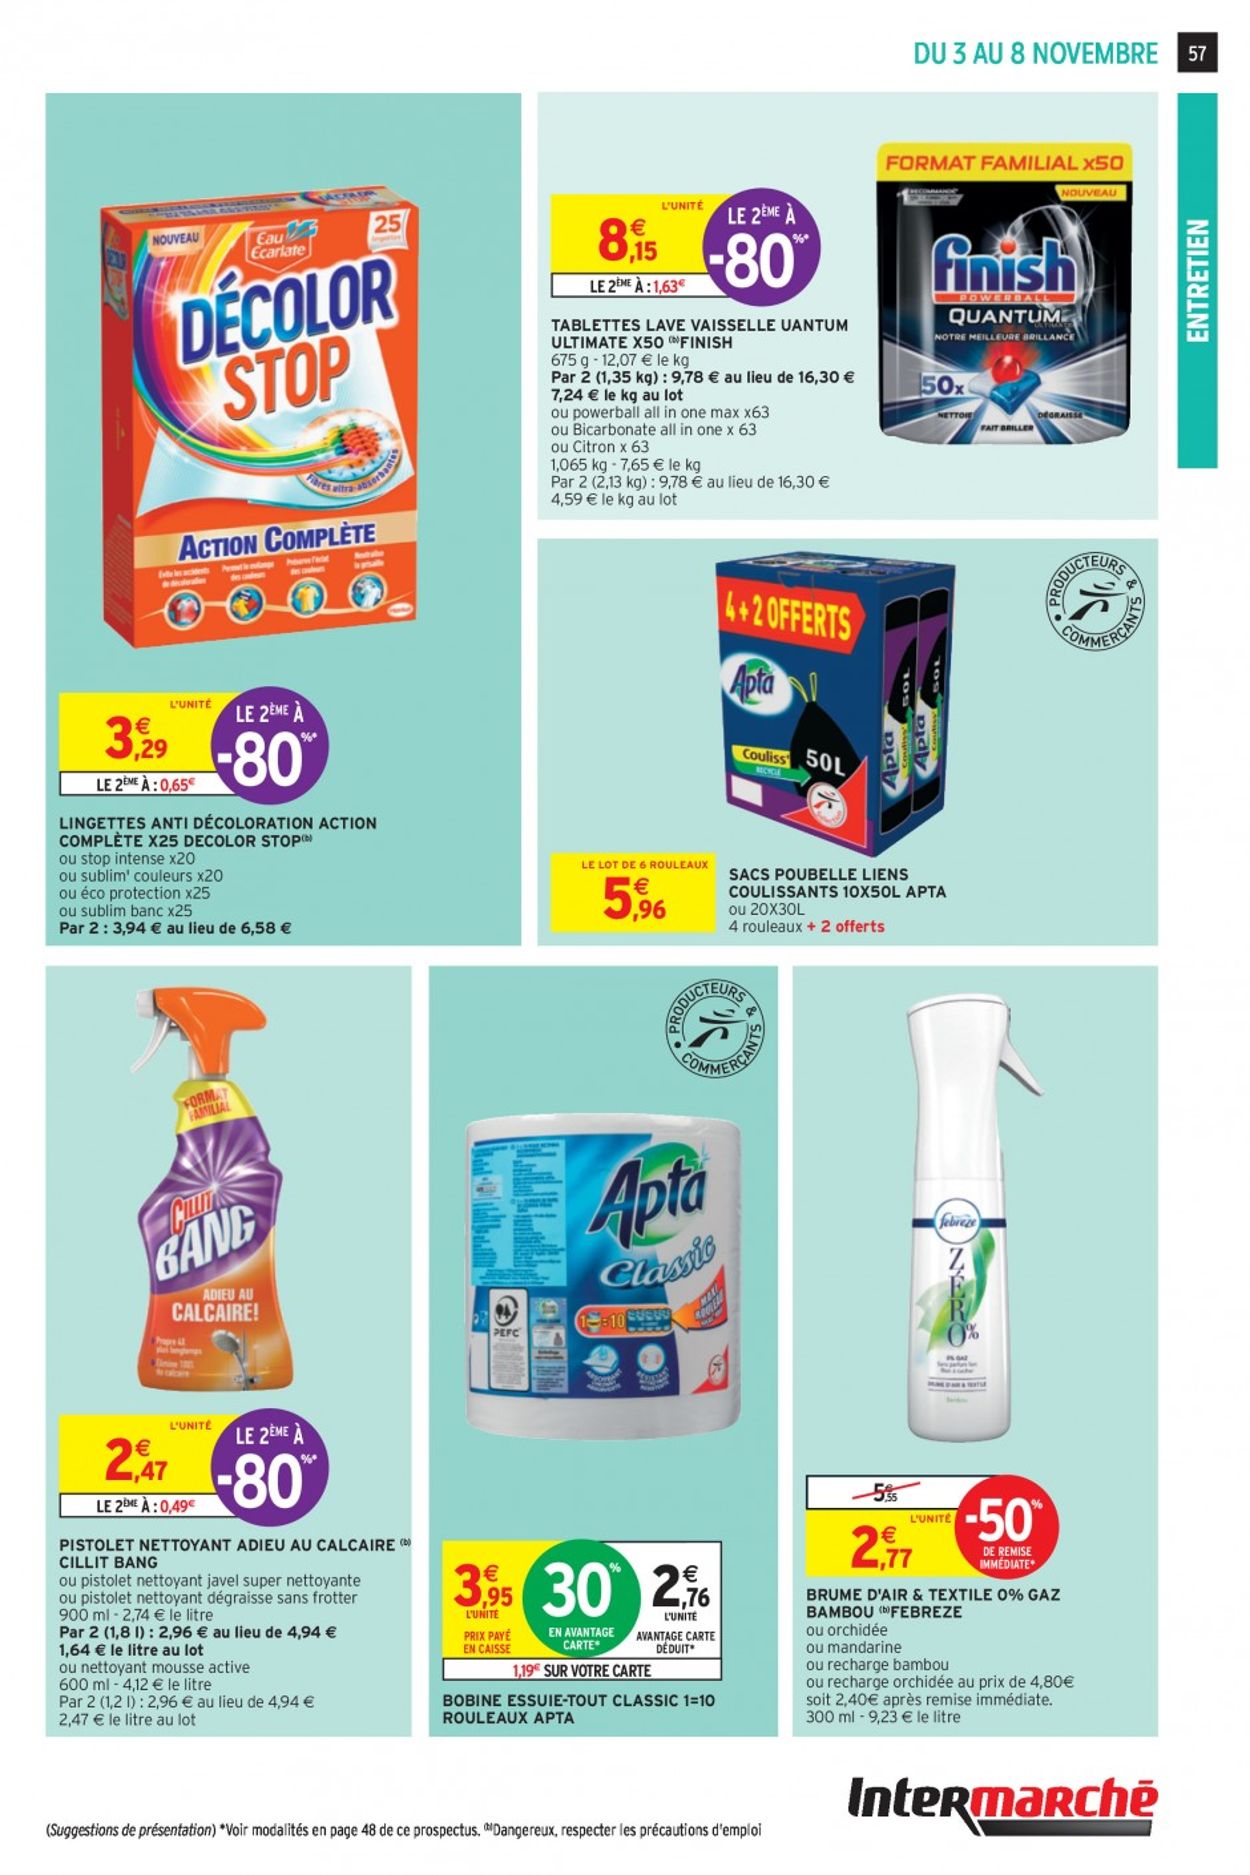 Intermarché Black Friday 2020 Catalogue - 03.11-08.11.2020 (Page 57)